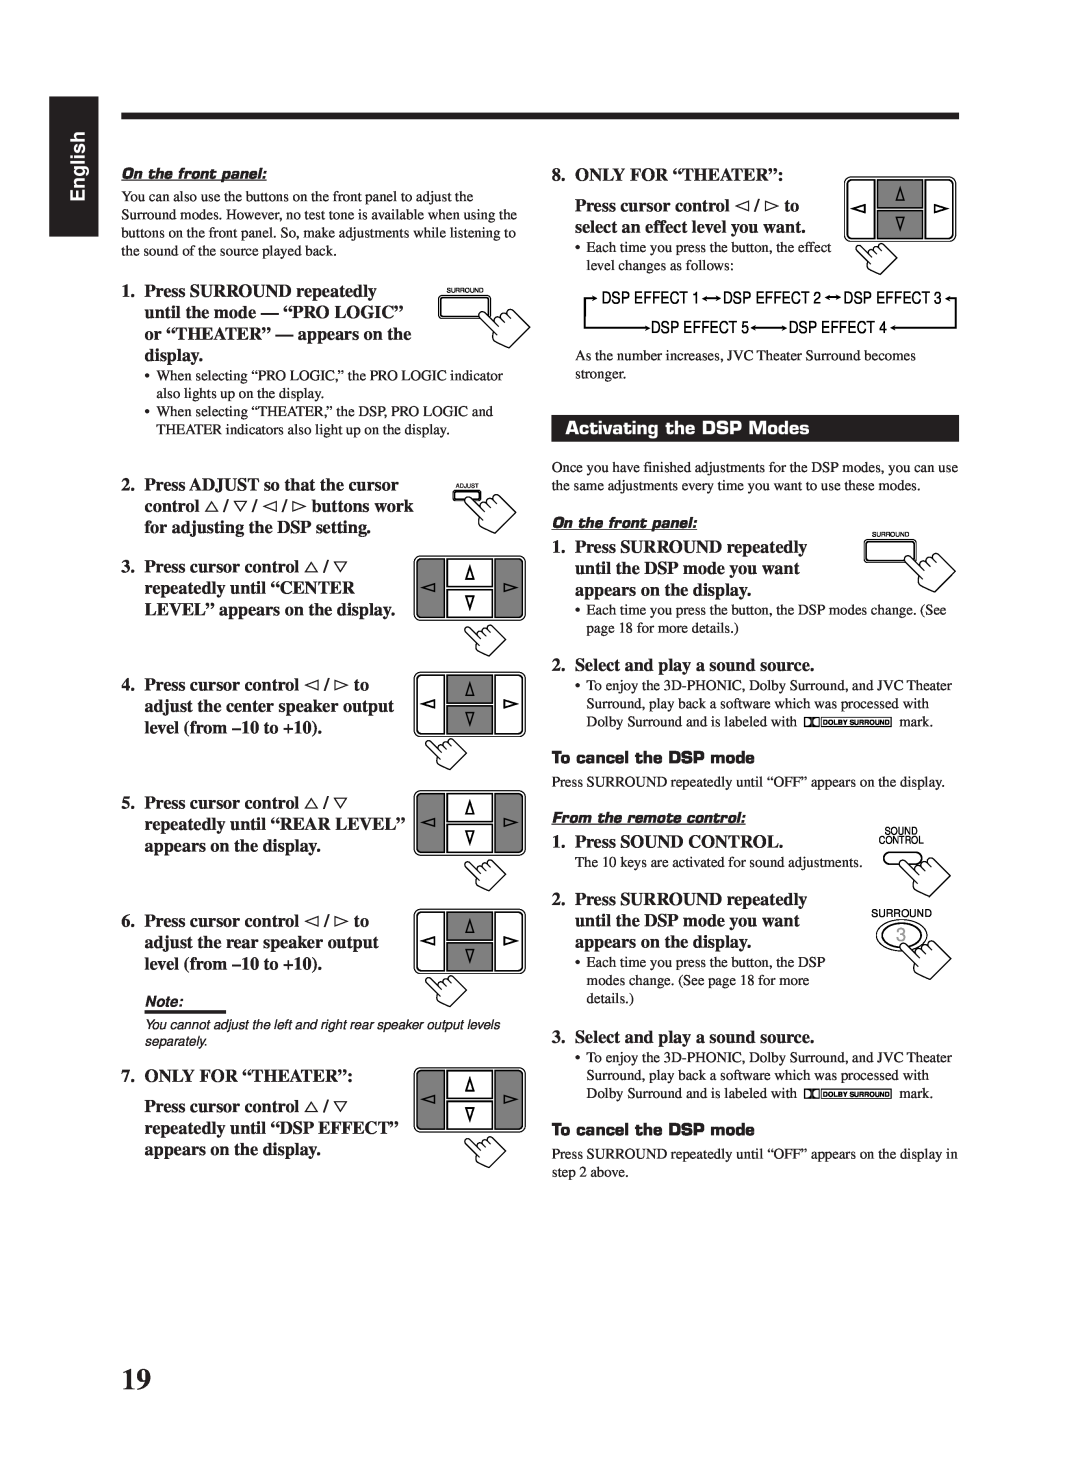 JVC RX-669PGD, LVT0142-006A manual English, Activating the DSP Modes 